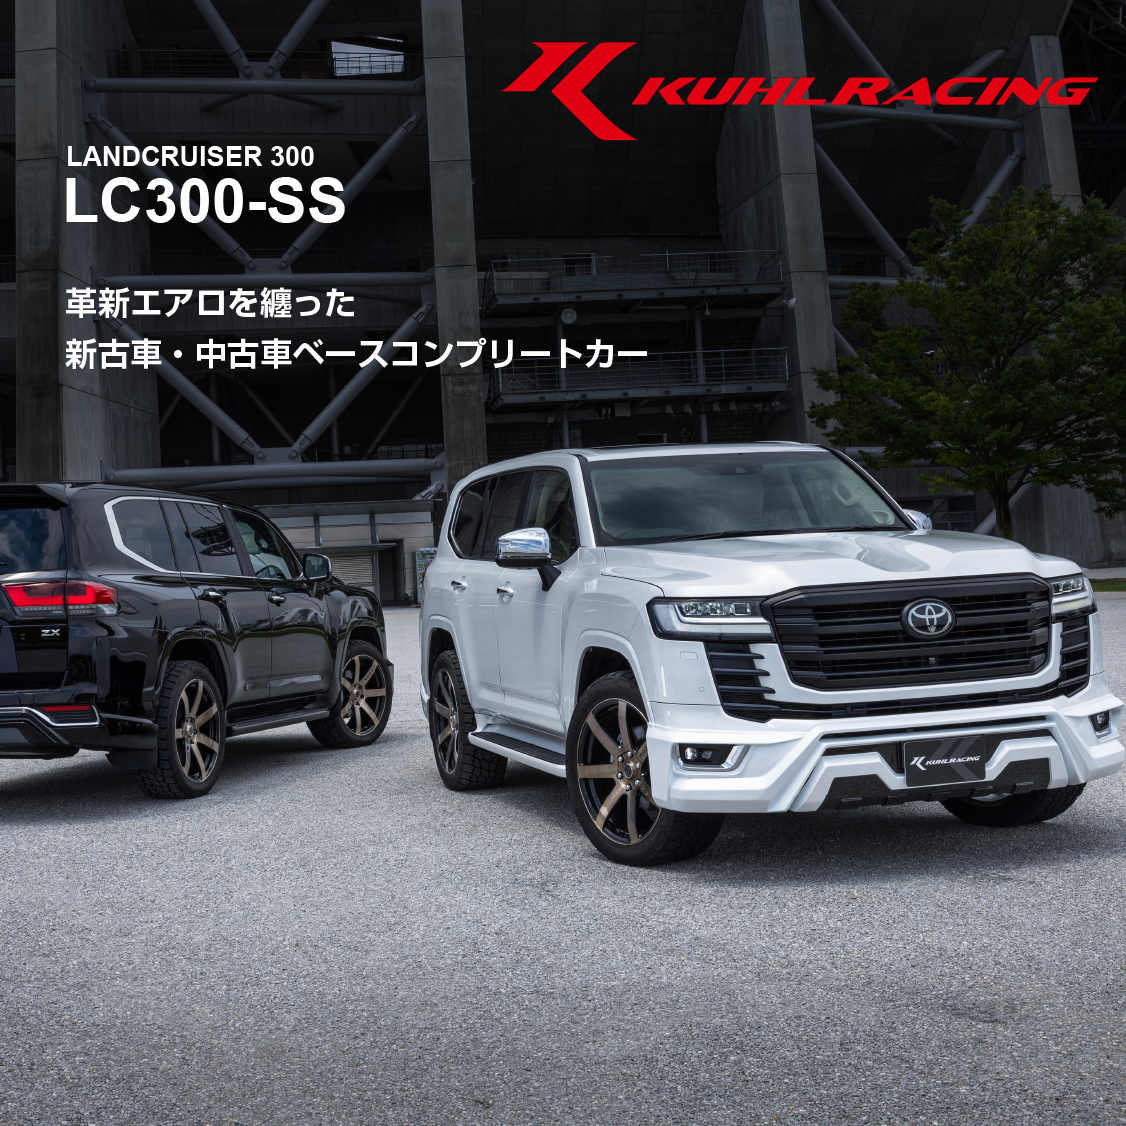 LC300-SS